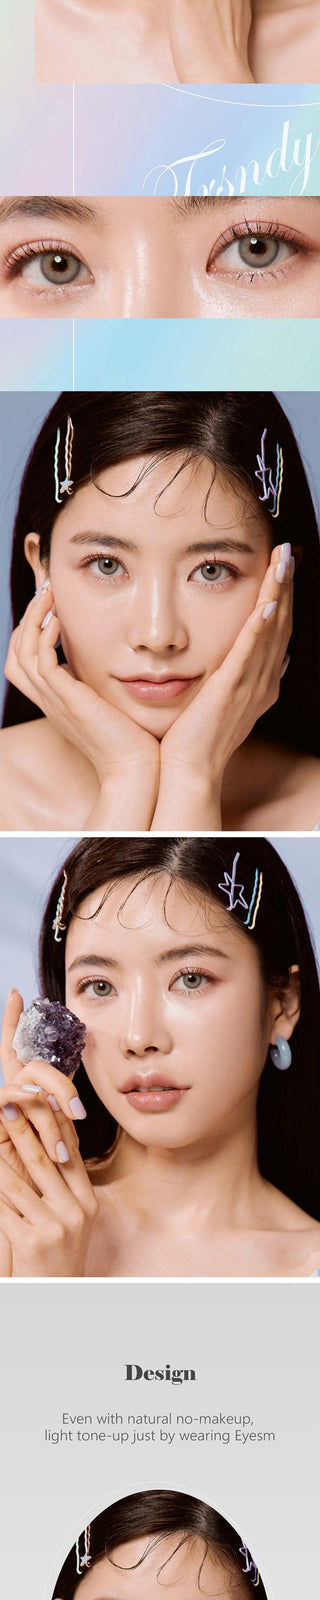 Several views of a Korean model with the Eyesm Shade Grey color contact lenses. An enlargement of a model's eyes with the prescription colored contacts, demonstrating the subtle yet striking change on dark eyes.